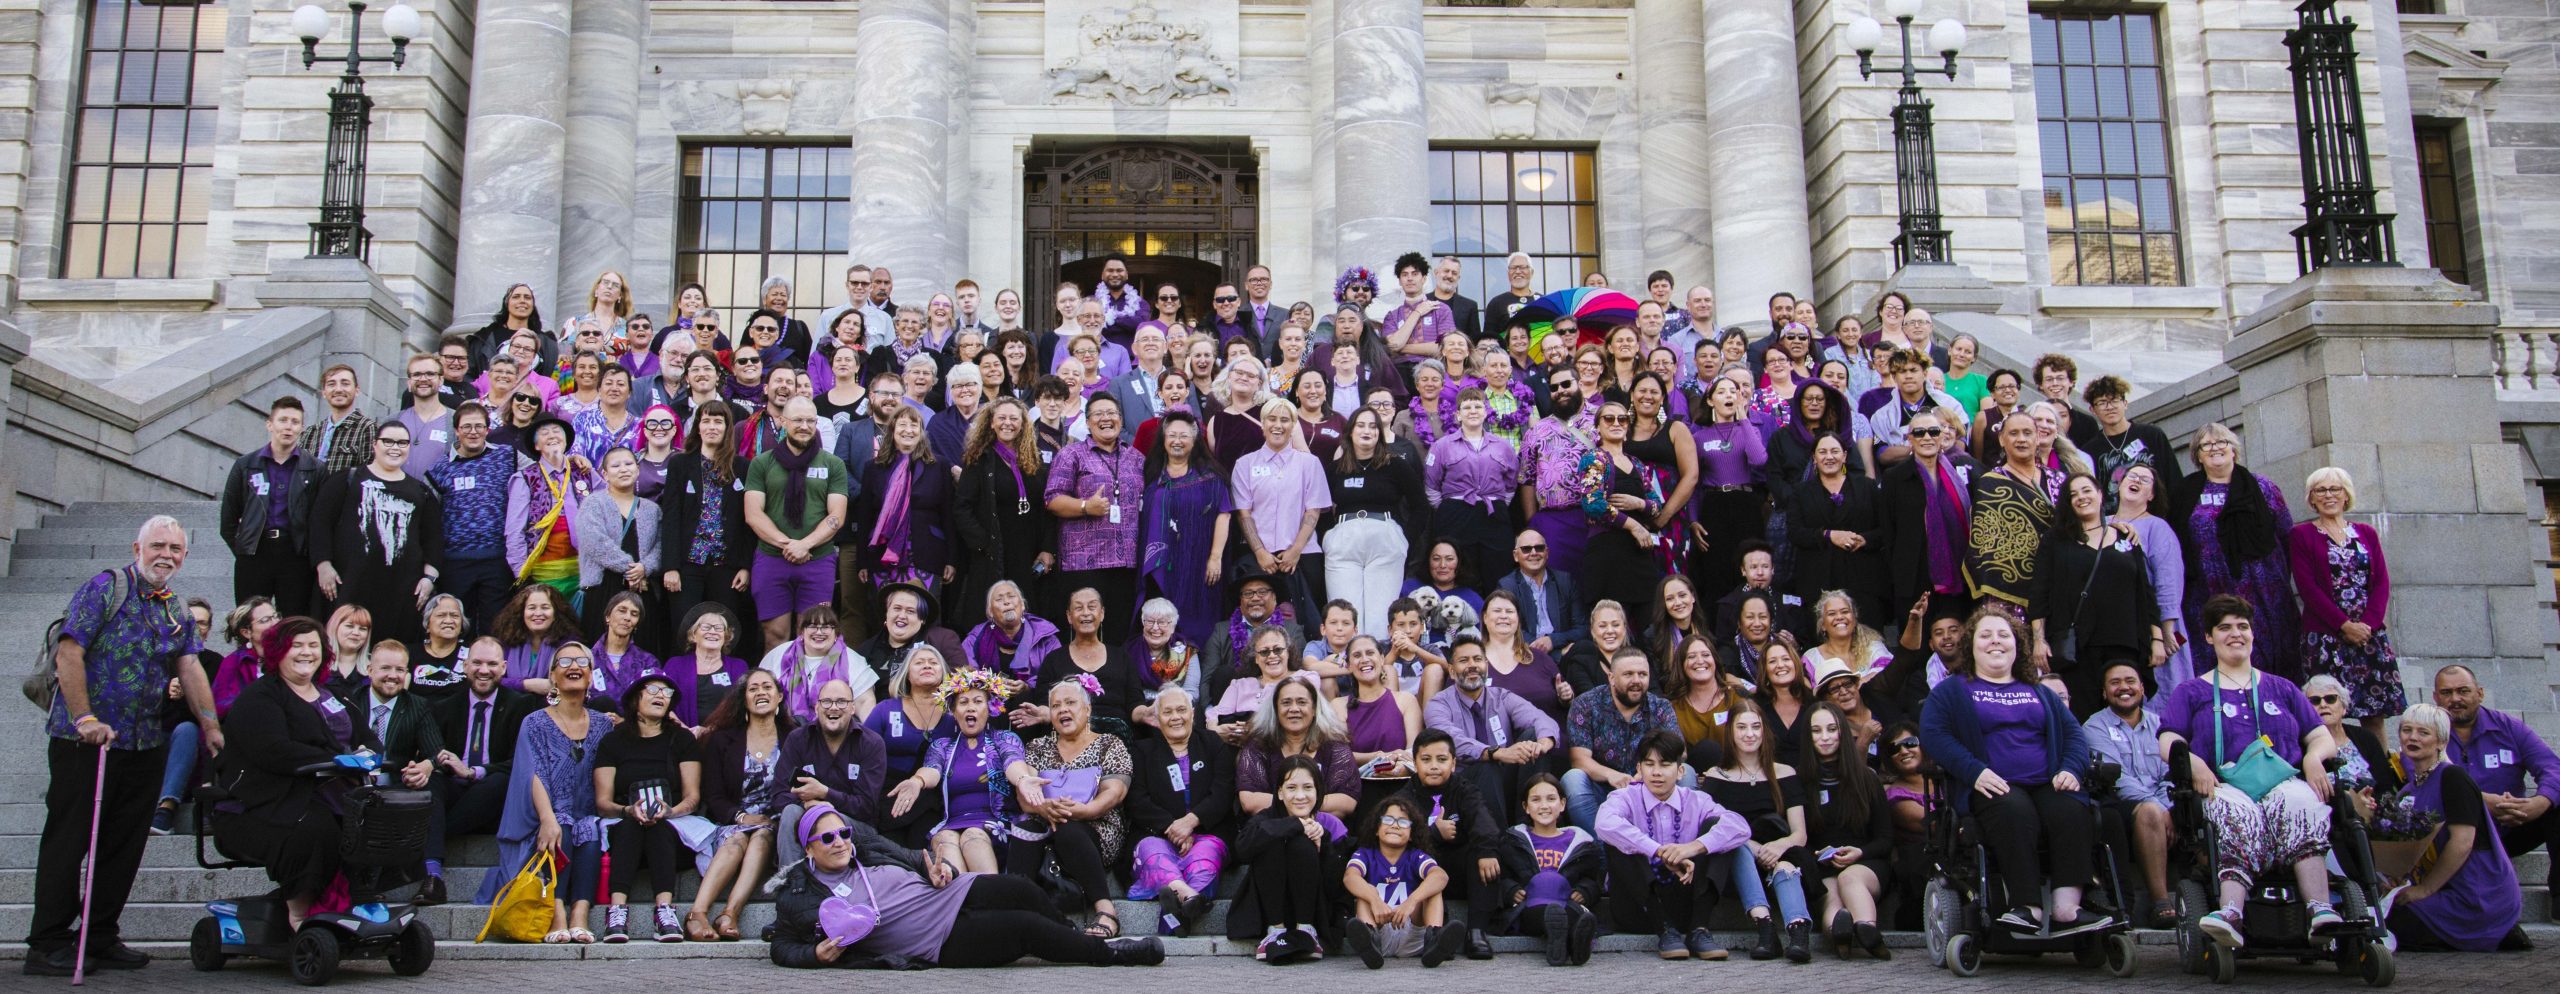 Elizabeth and her whānau, friends, and colleagues on the steps of parliament on the day of her maiden speech. Hundreds of Elizabeth's supporters showed up to "paint parliament purple" - everyone is wearing purple and smiling.